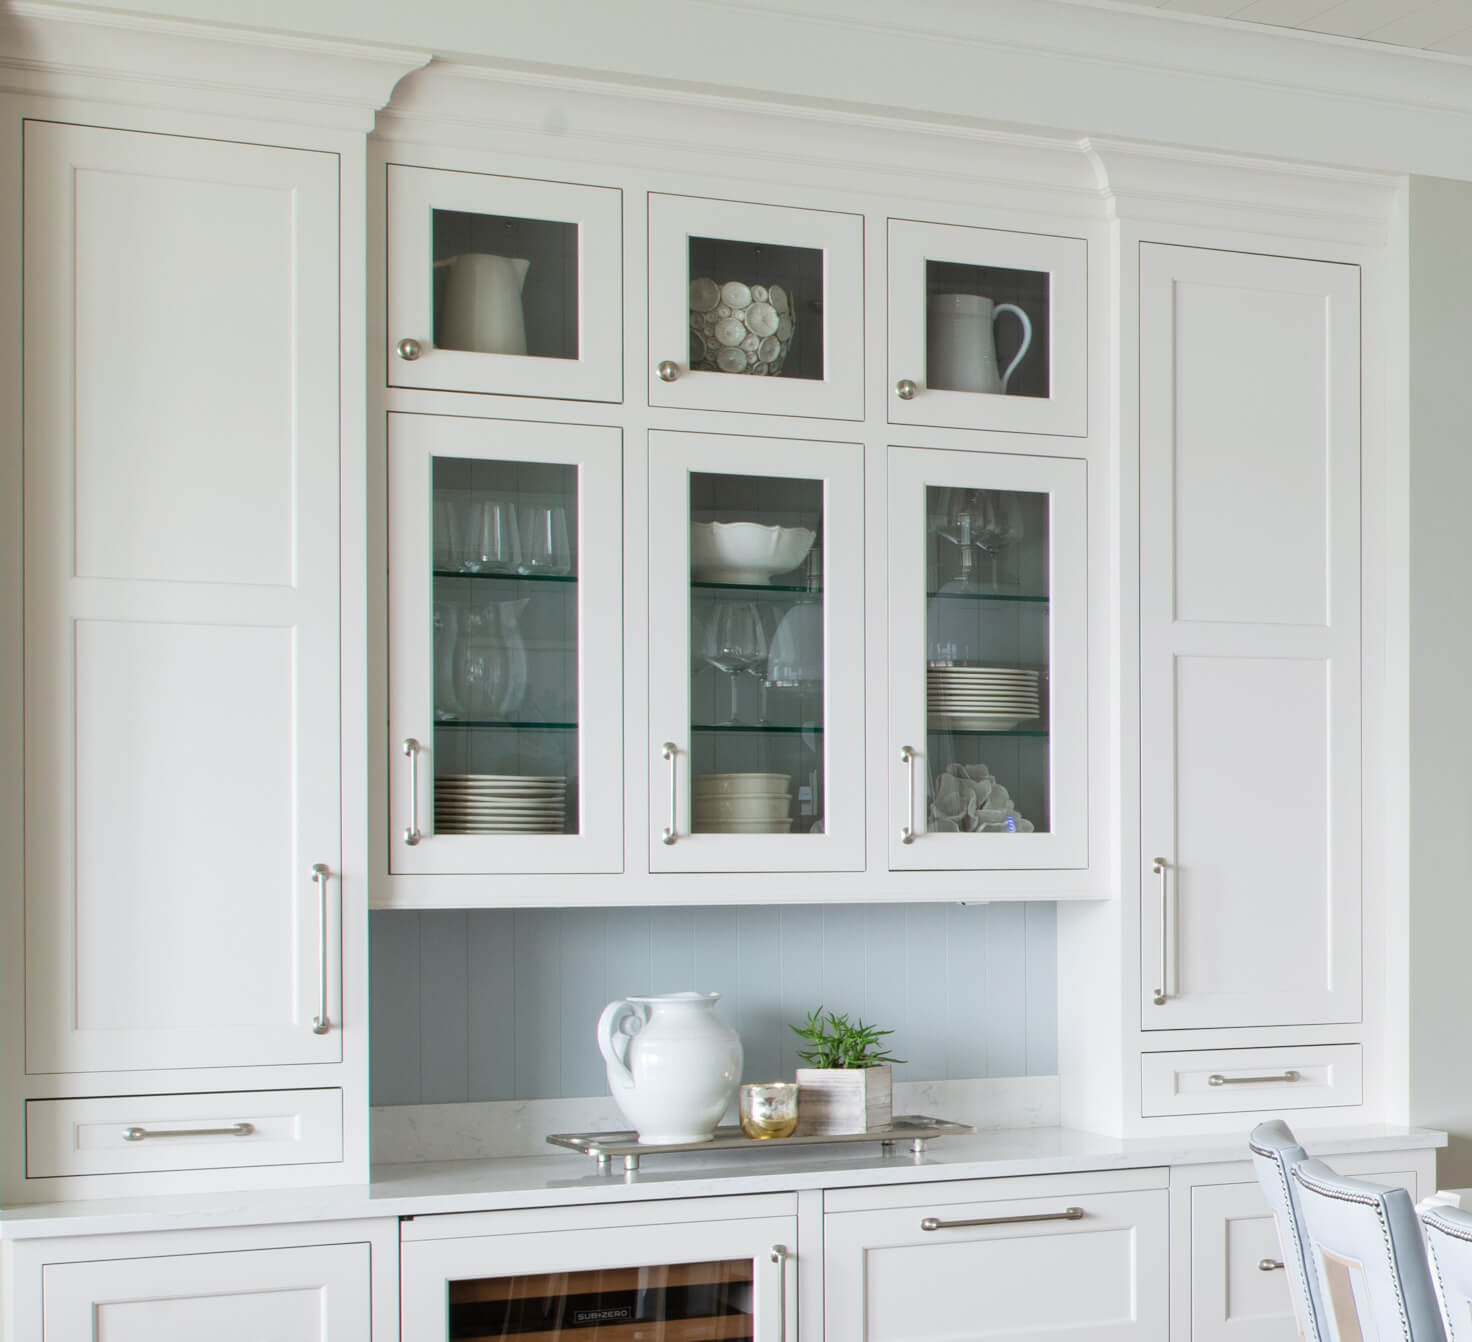 A dining room hutch-like area of the kitchen with glass cabinet doors for displaying and storing serveware and dishware.